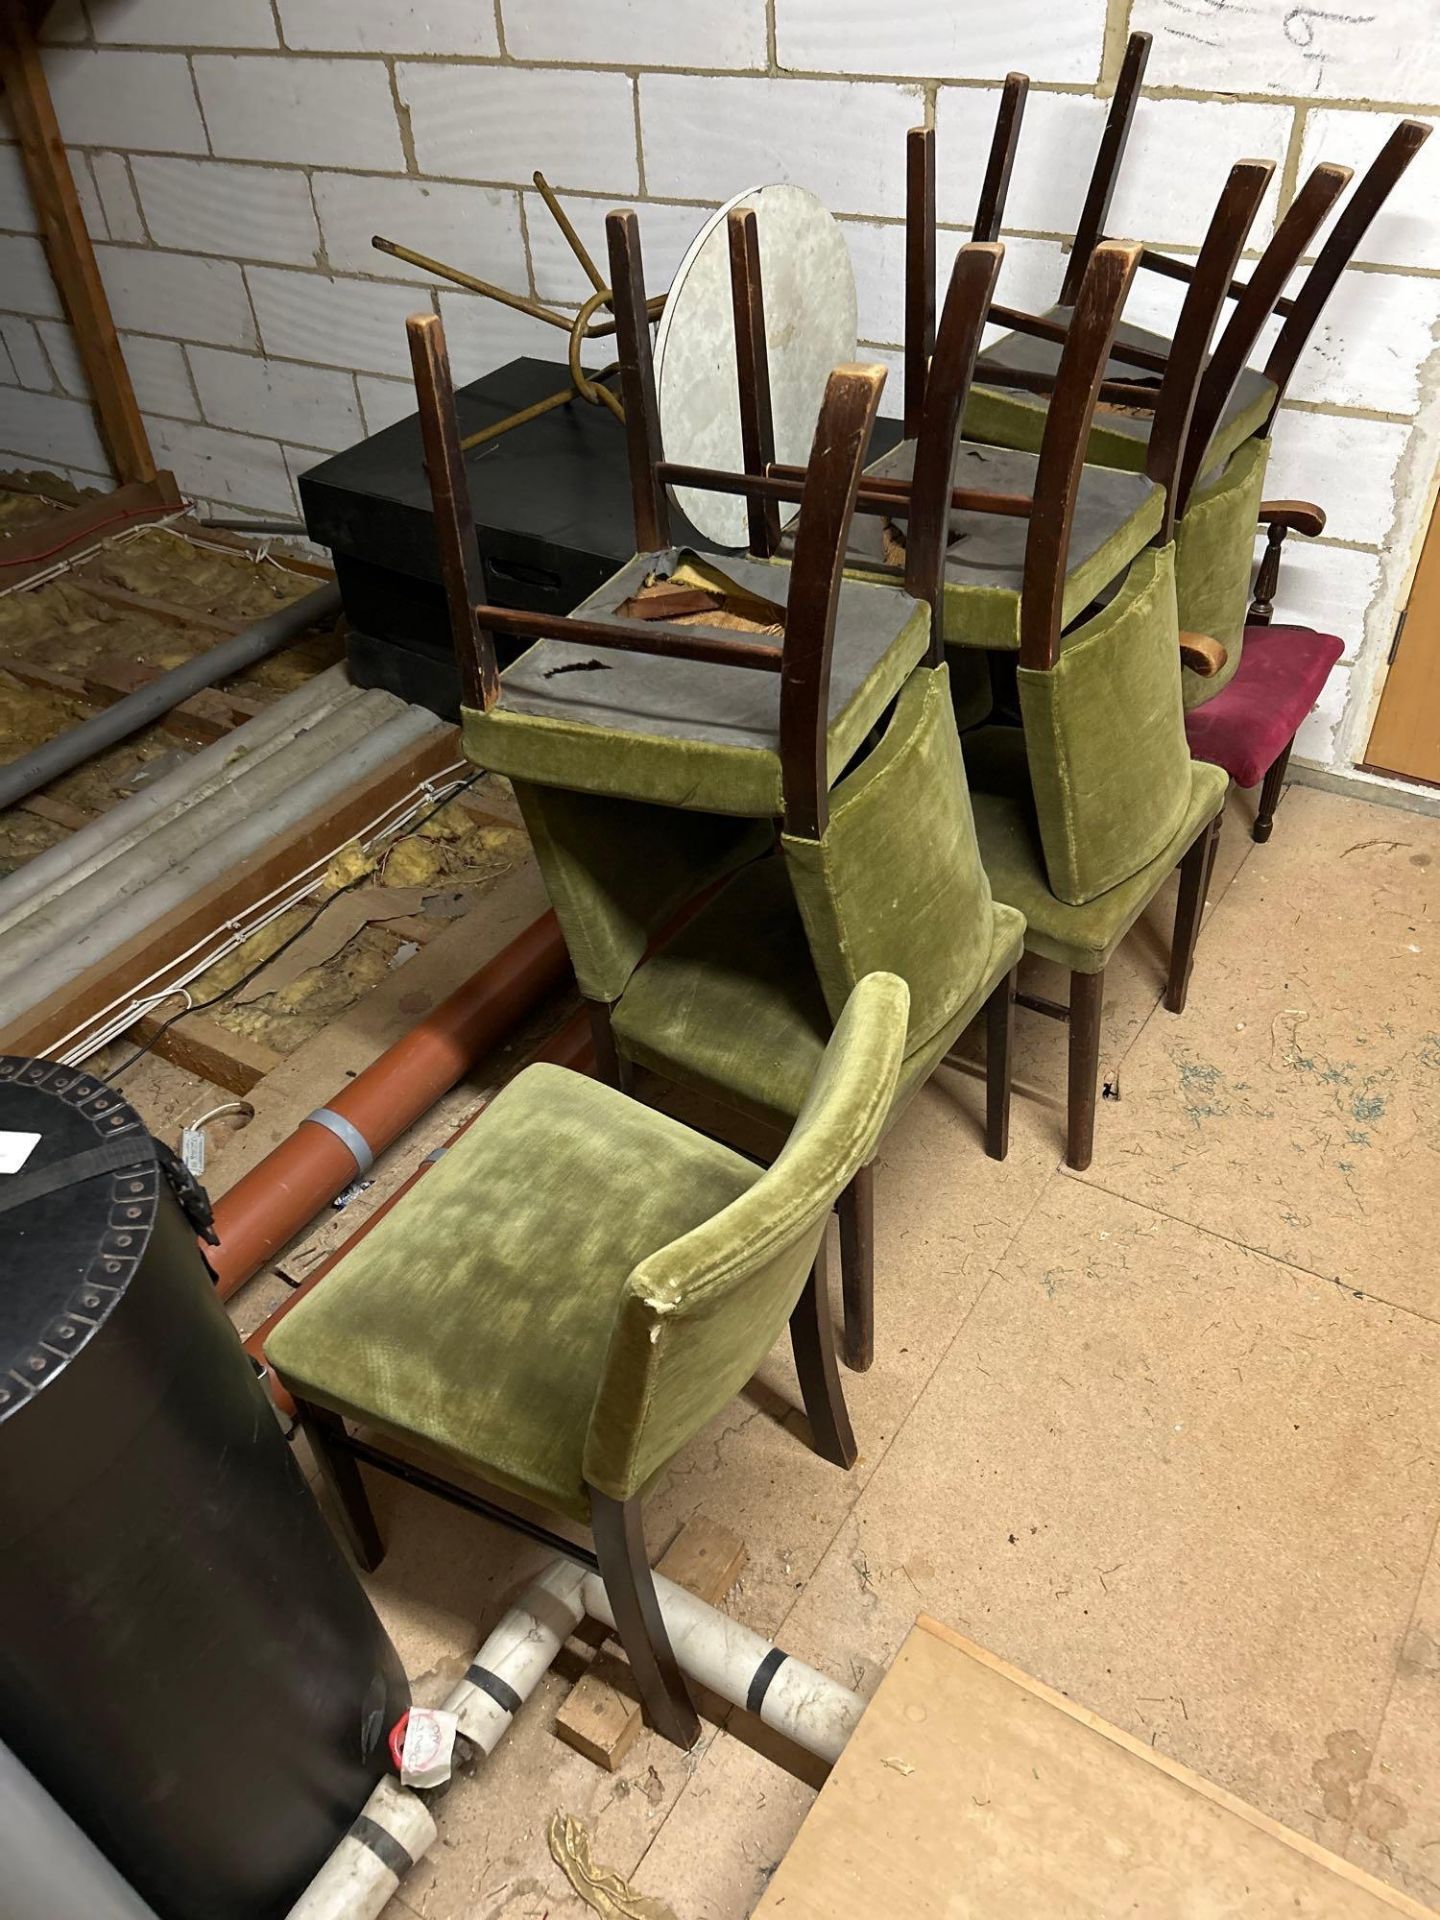 Quantity Of Restaurant Tables And Chairs. Top Floor Storage, As Found.